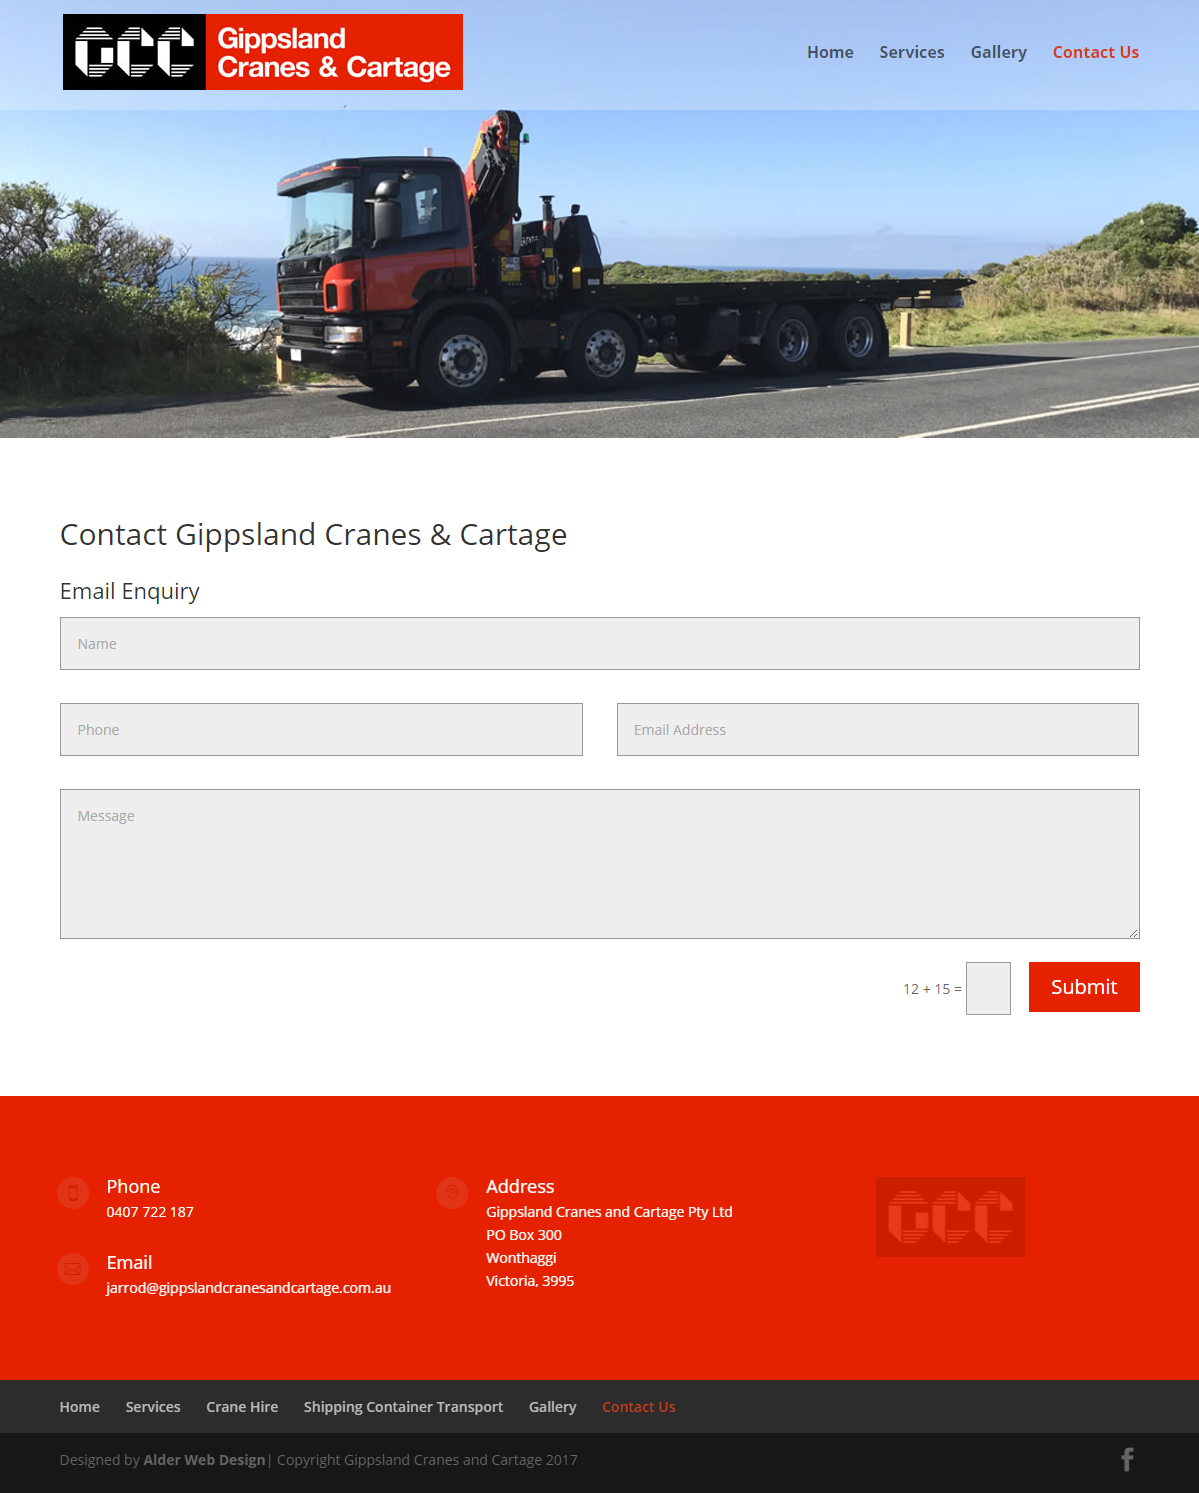 GCC Contact Page